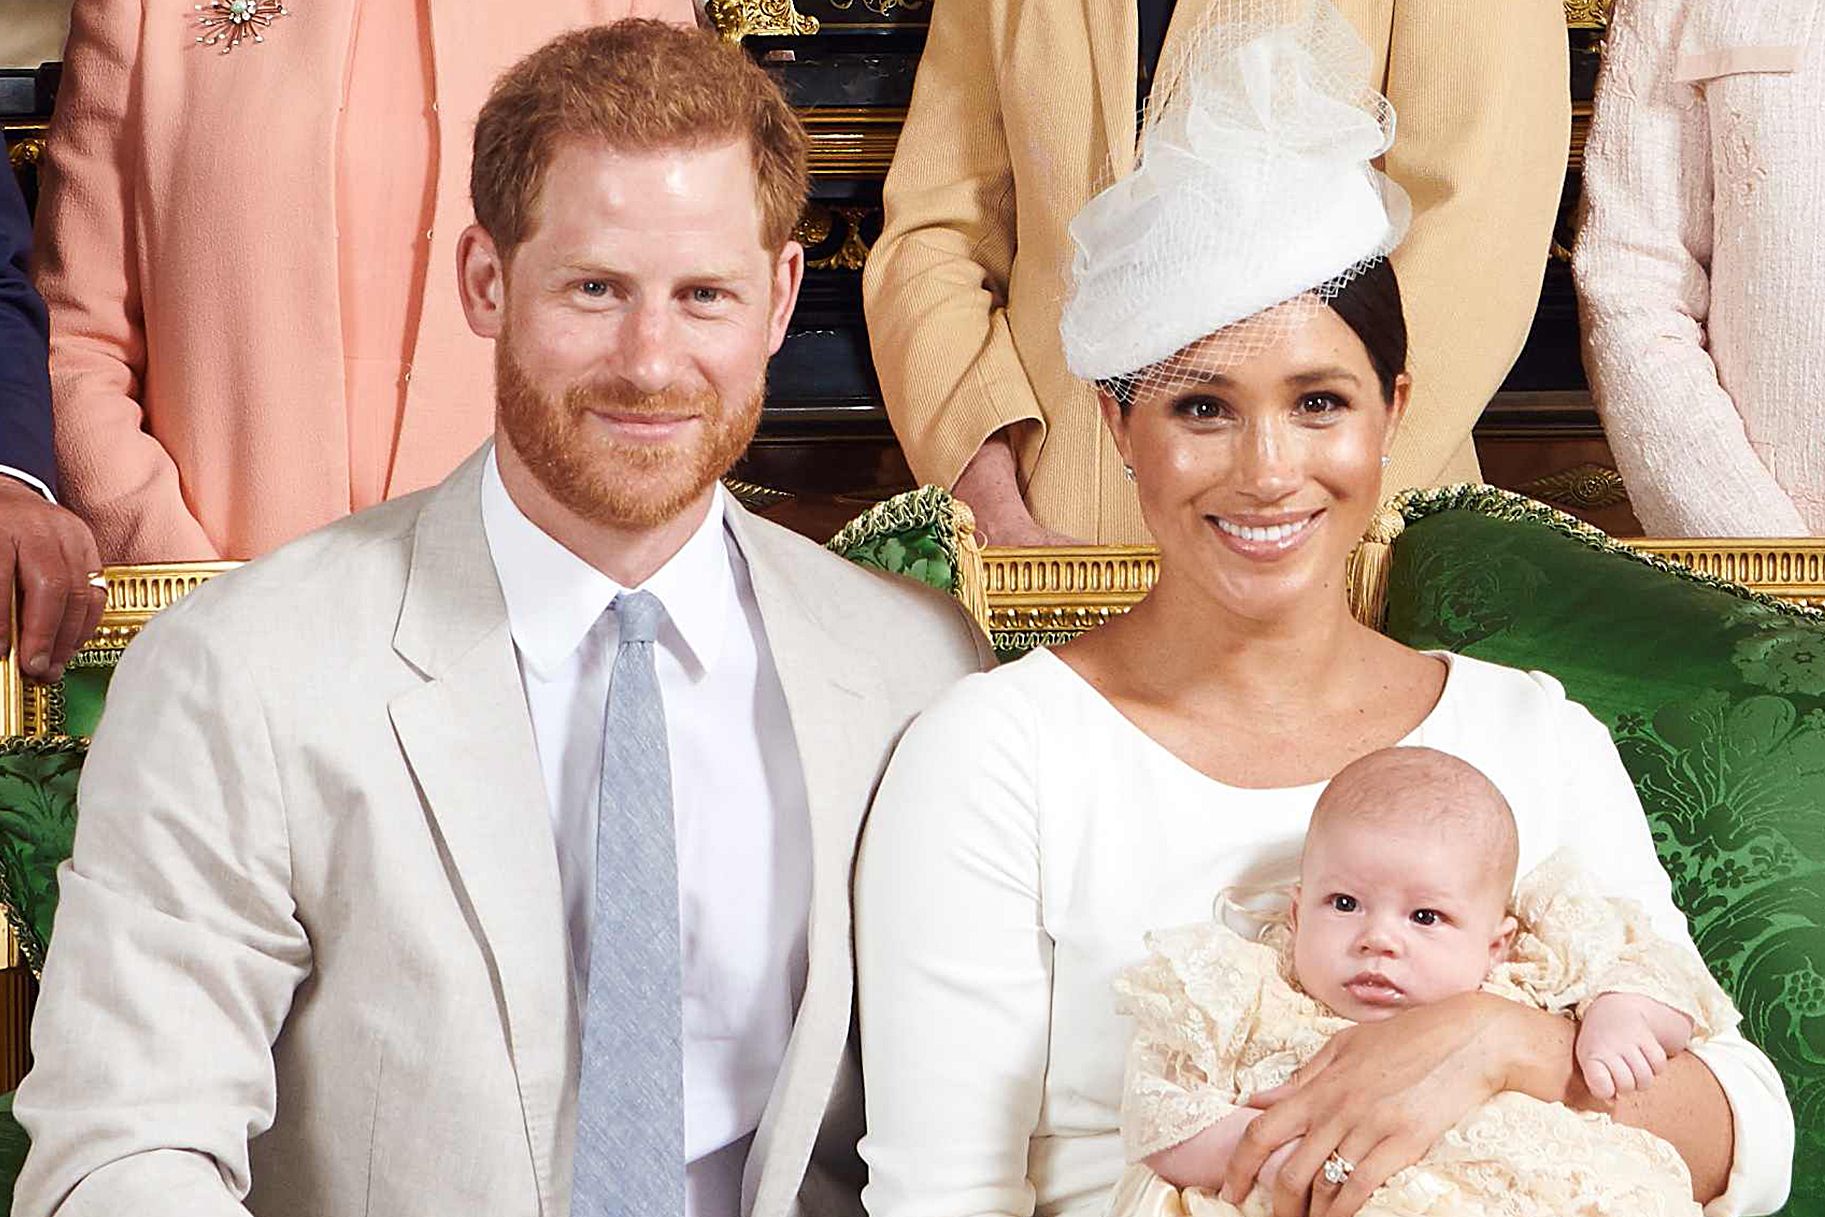 meghan markle and prince harry's son archie was born in may 2019